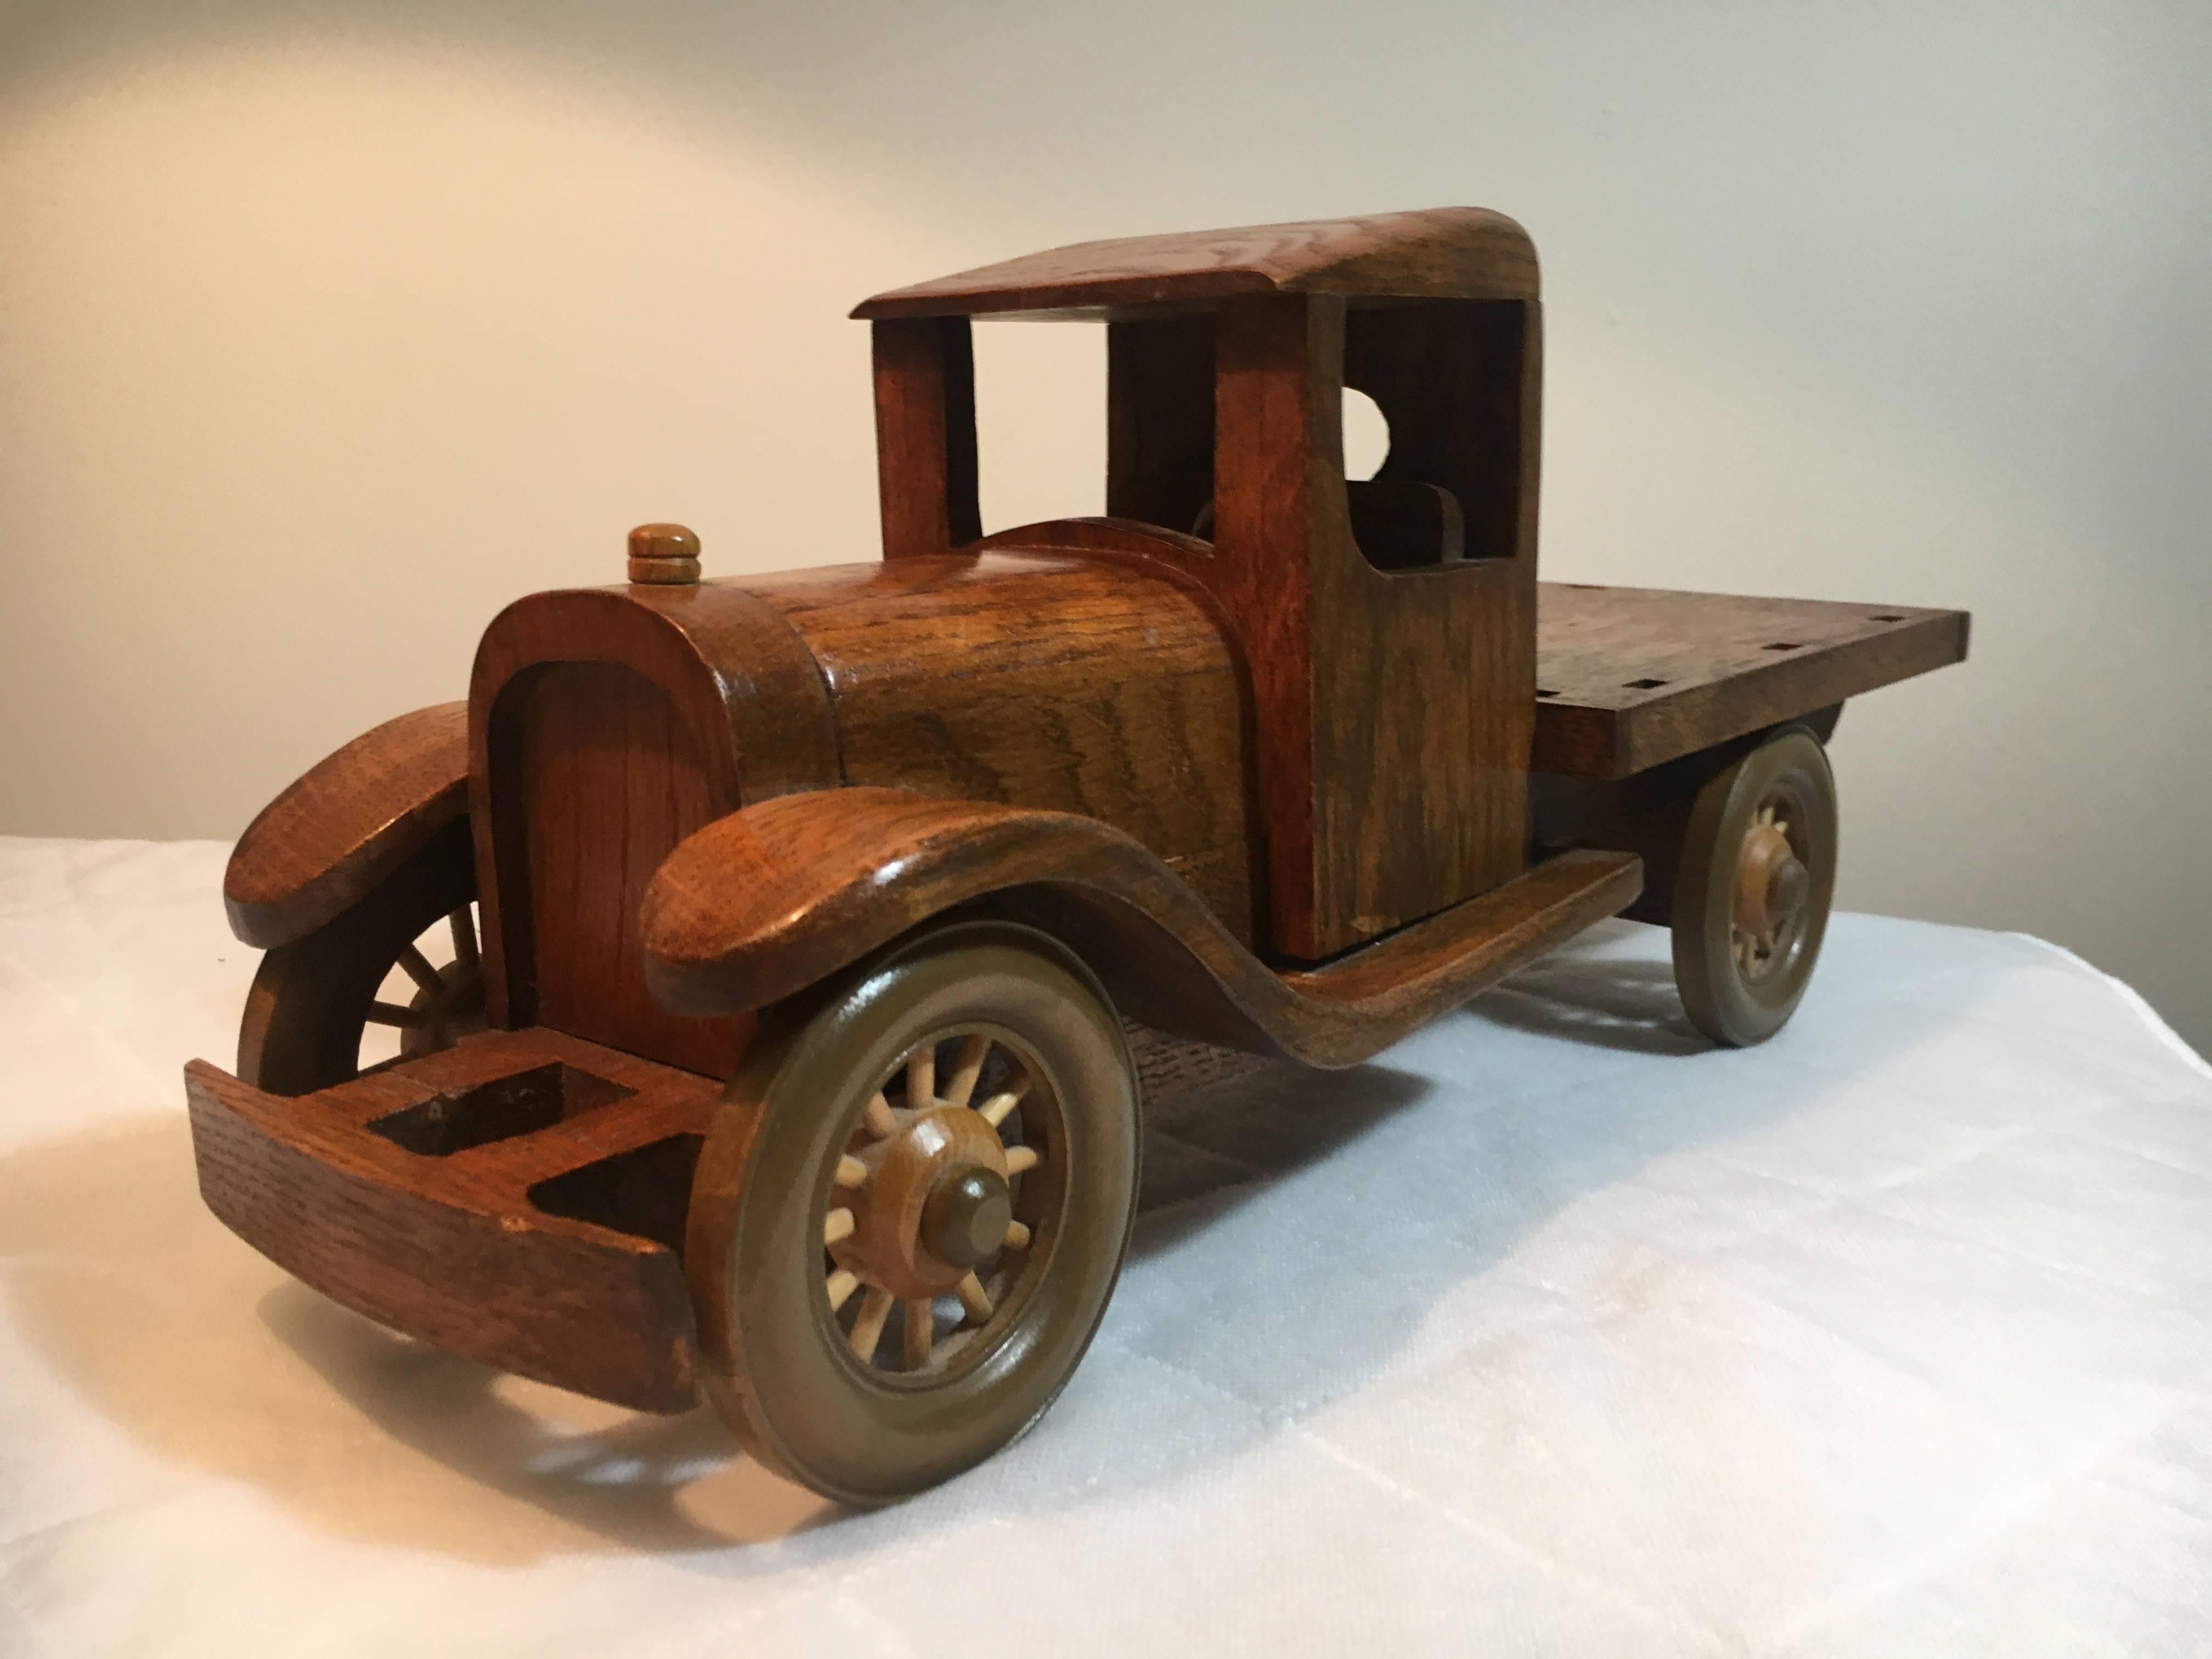 Wooden Folk Art toy truck with removable stakes. Beautifully made wooden stake bed truck with removable stakes - wheels turn and work, signed by the Artist, Ed Bennett - Madison, Indiana.